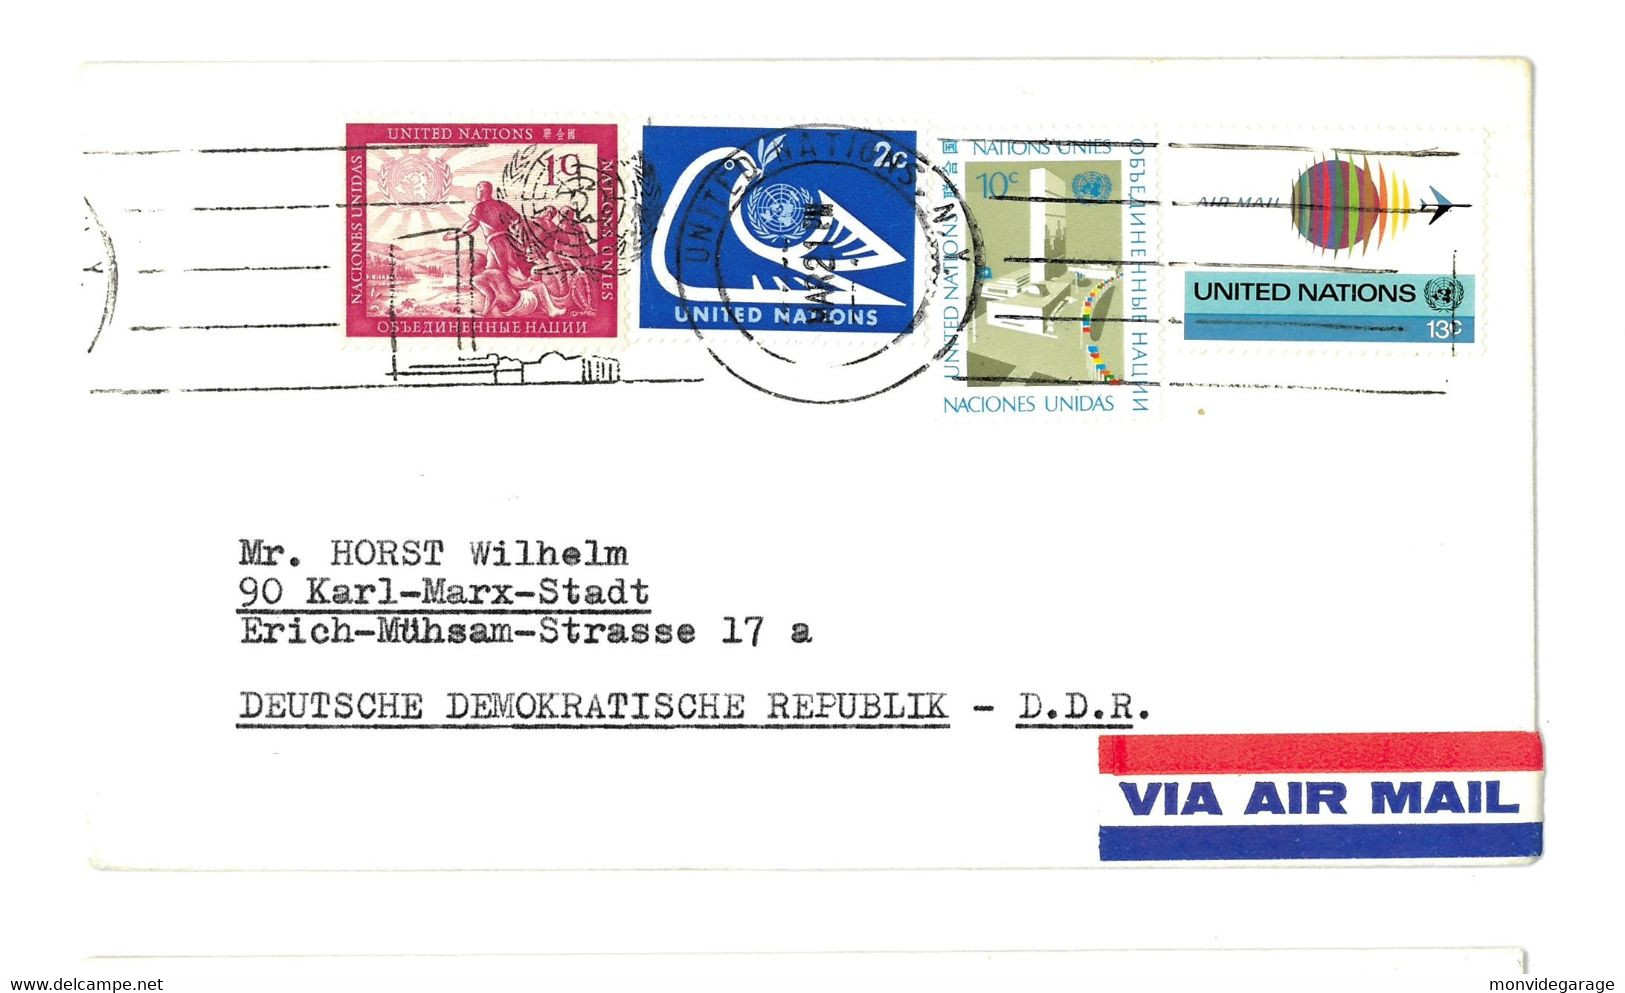 United Nations - Via Air Mail - New York 087 - Airmail